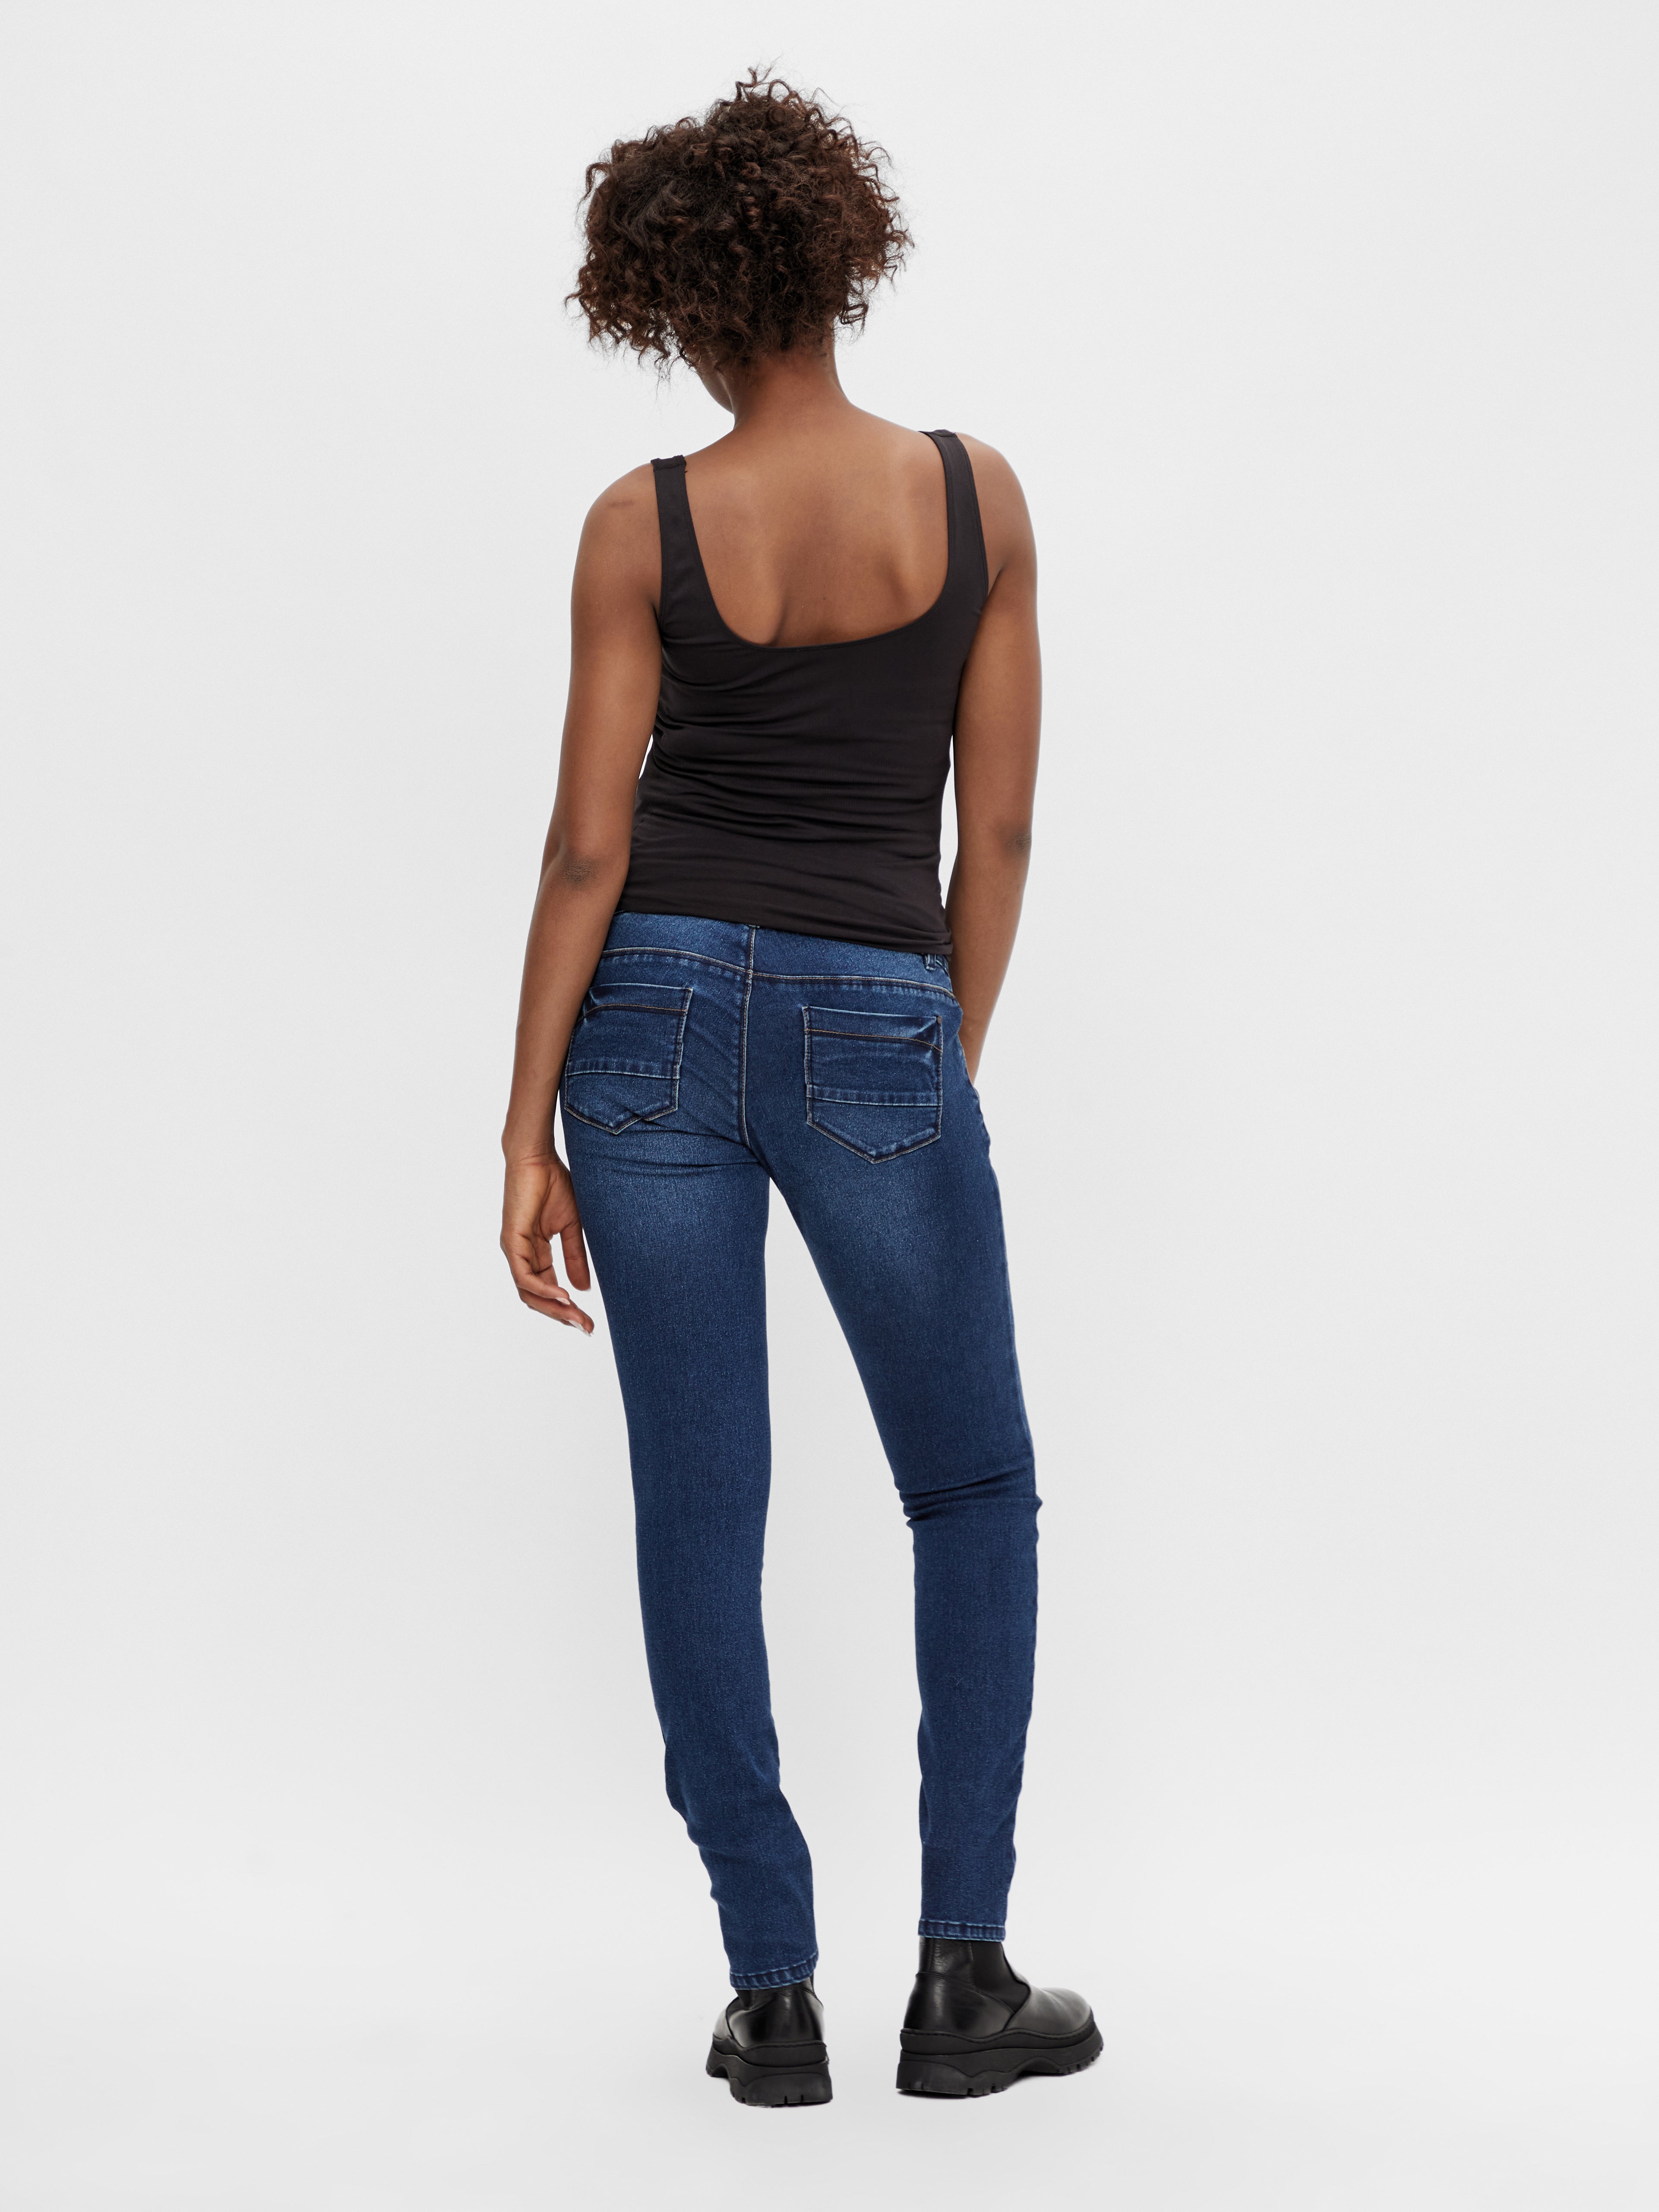 Jeans 20% Fit discount! with Slim